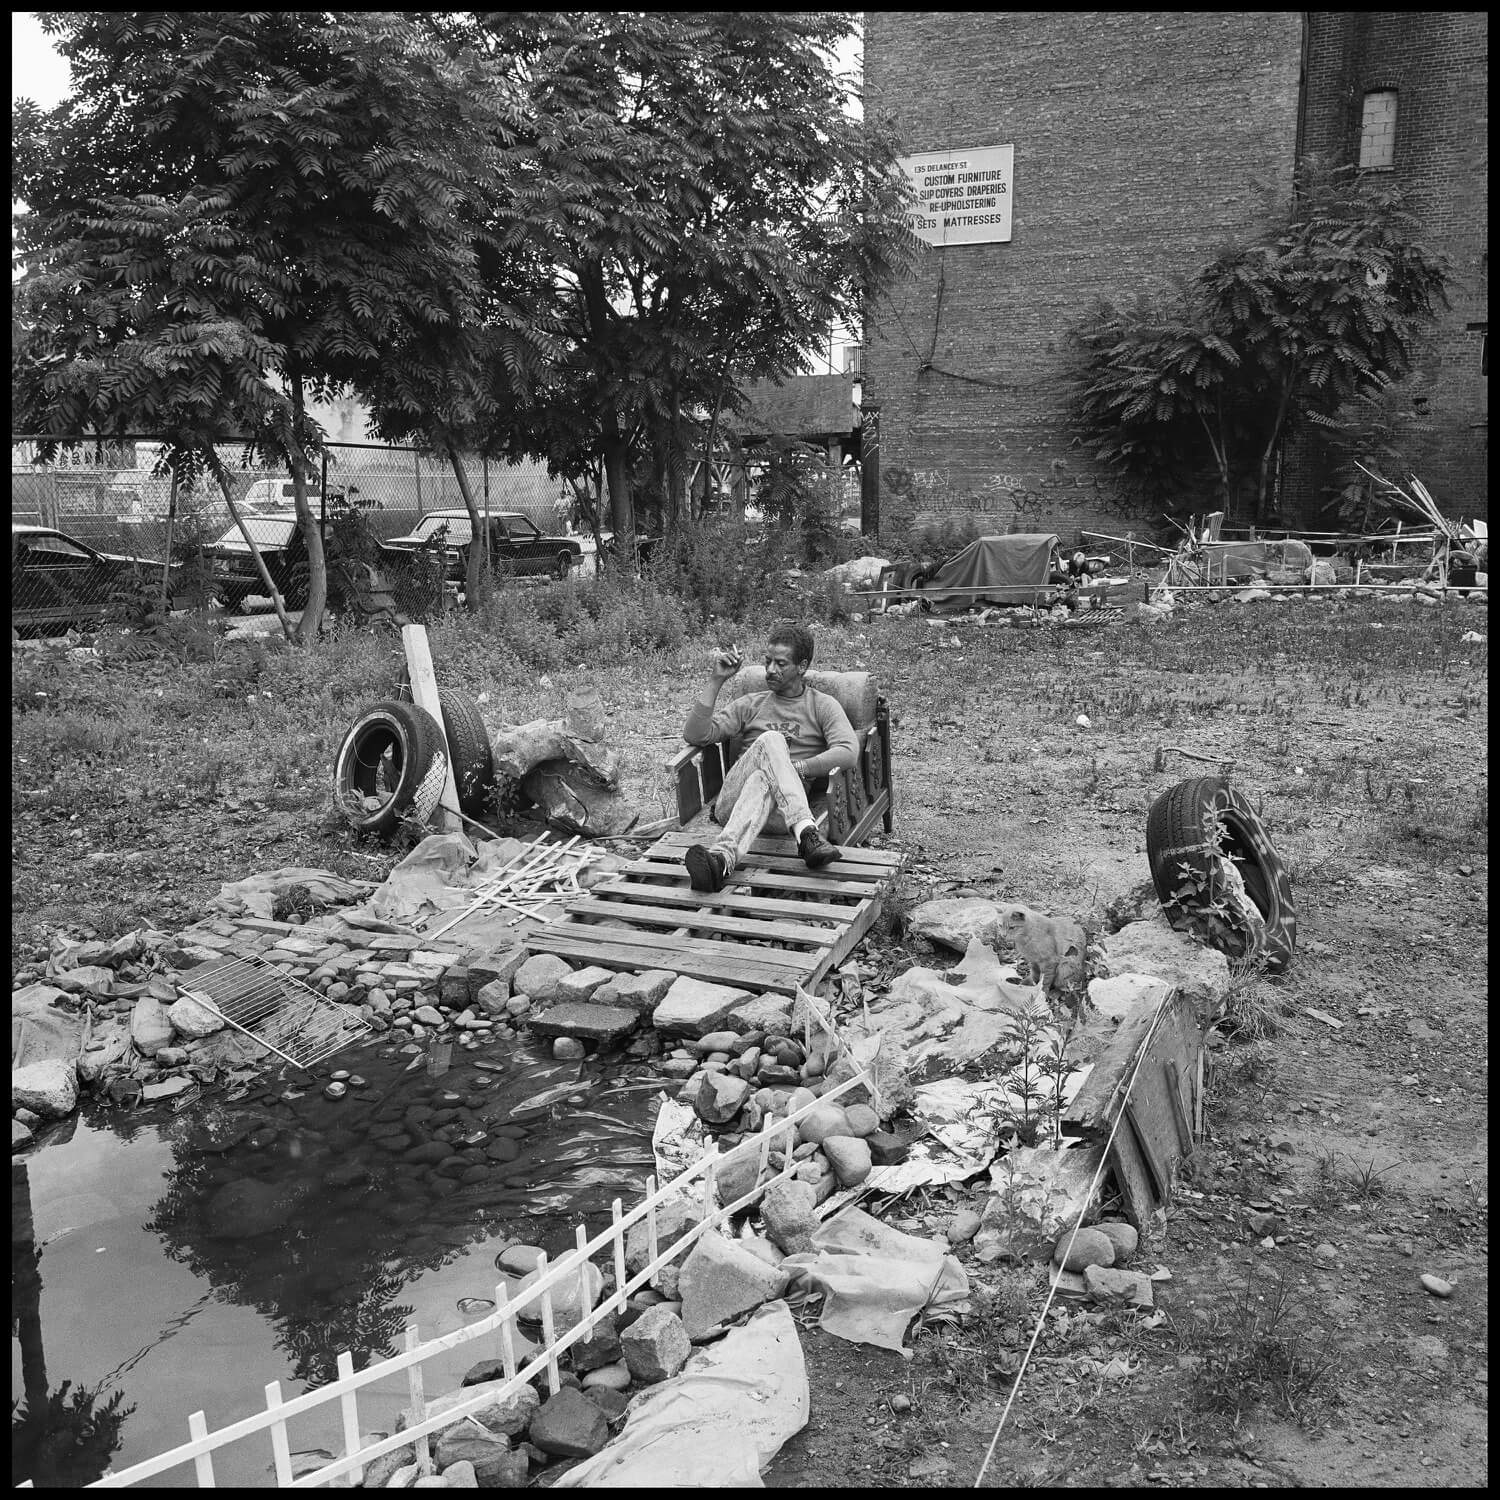 Photo of homeless residents of a garden